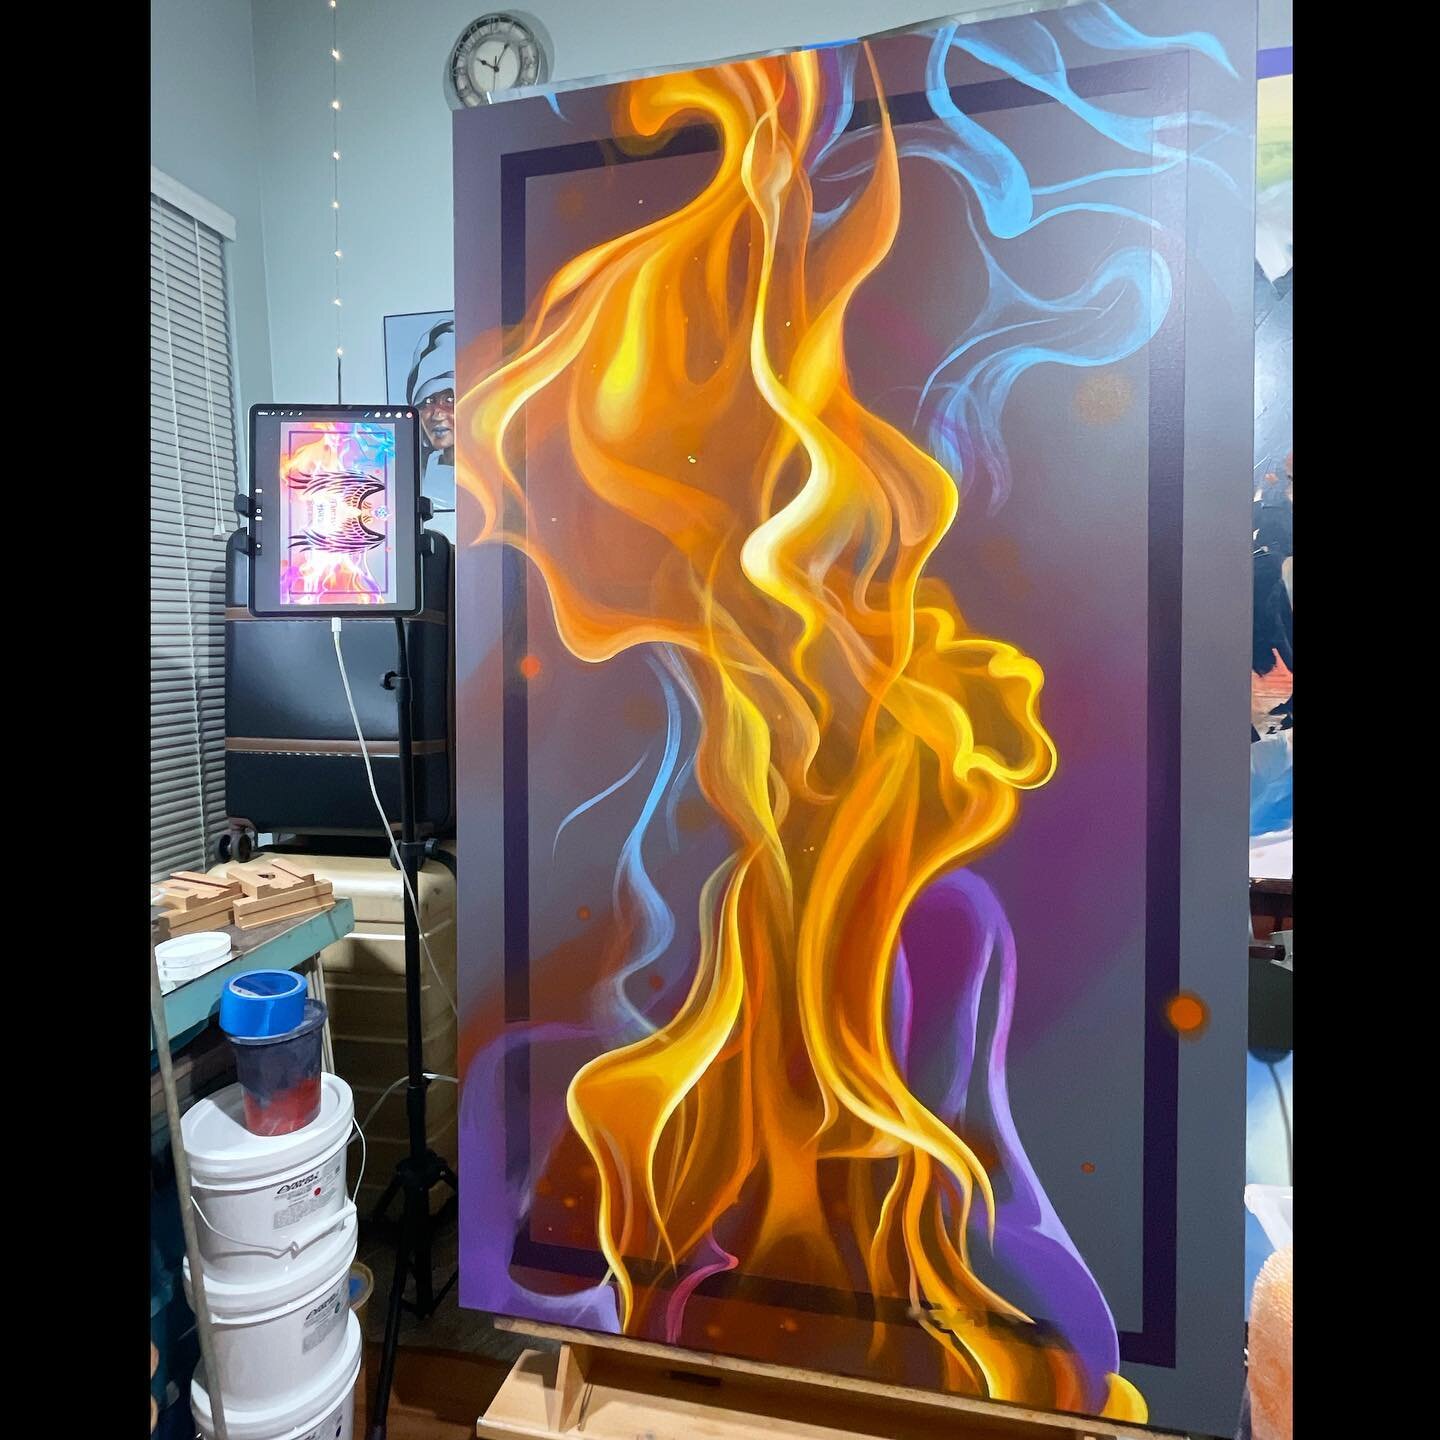 This commission made it to its new home at @fantasyhopsbrewing! I had so much fun with the fire 🔥
Acrylic on canvas, 36x60
SOLD
.
.
.
#acryliconcanvas #acrylicpainting #commissionedart #custompainting